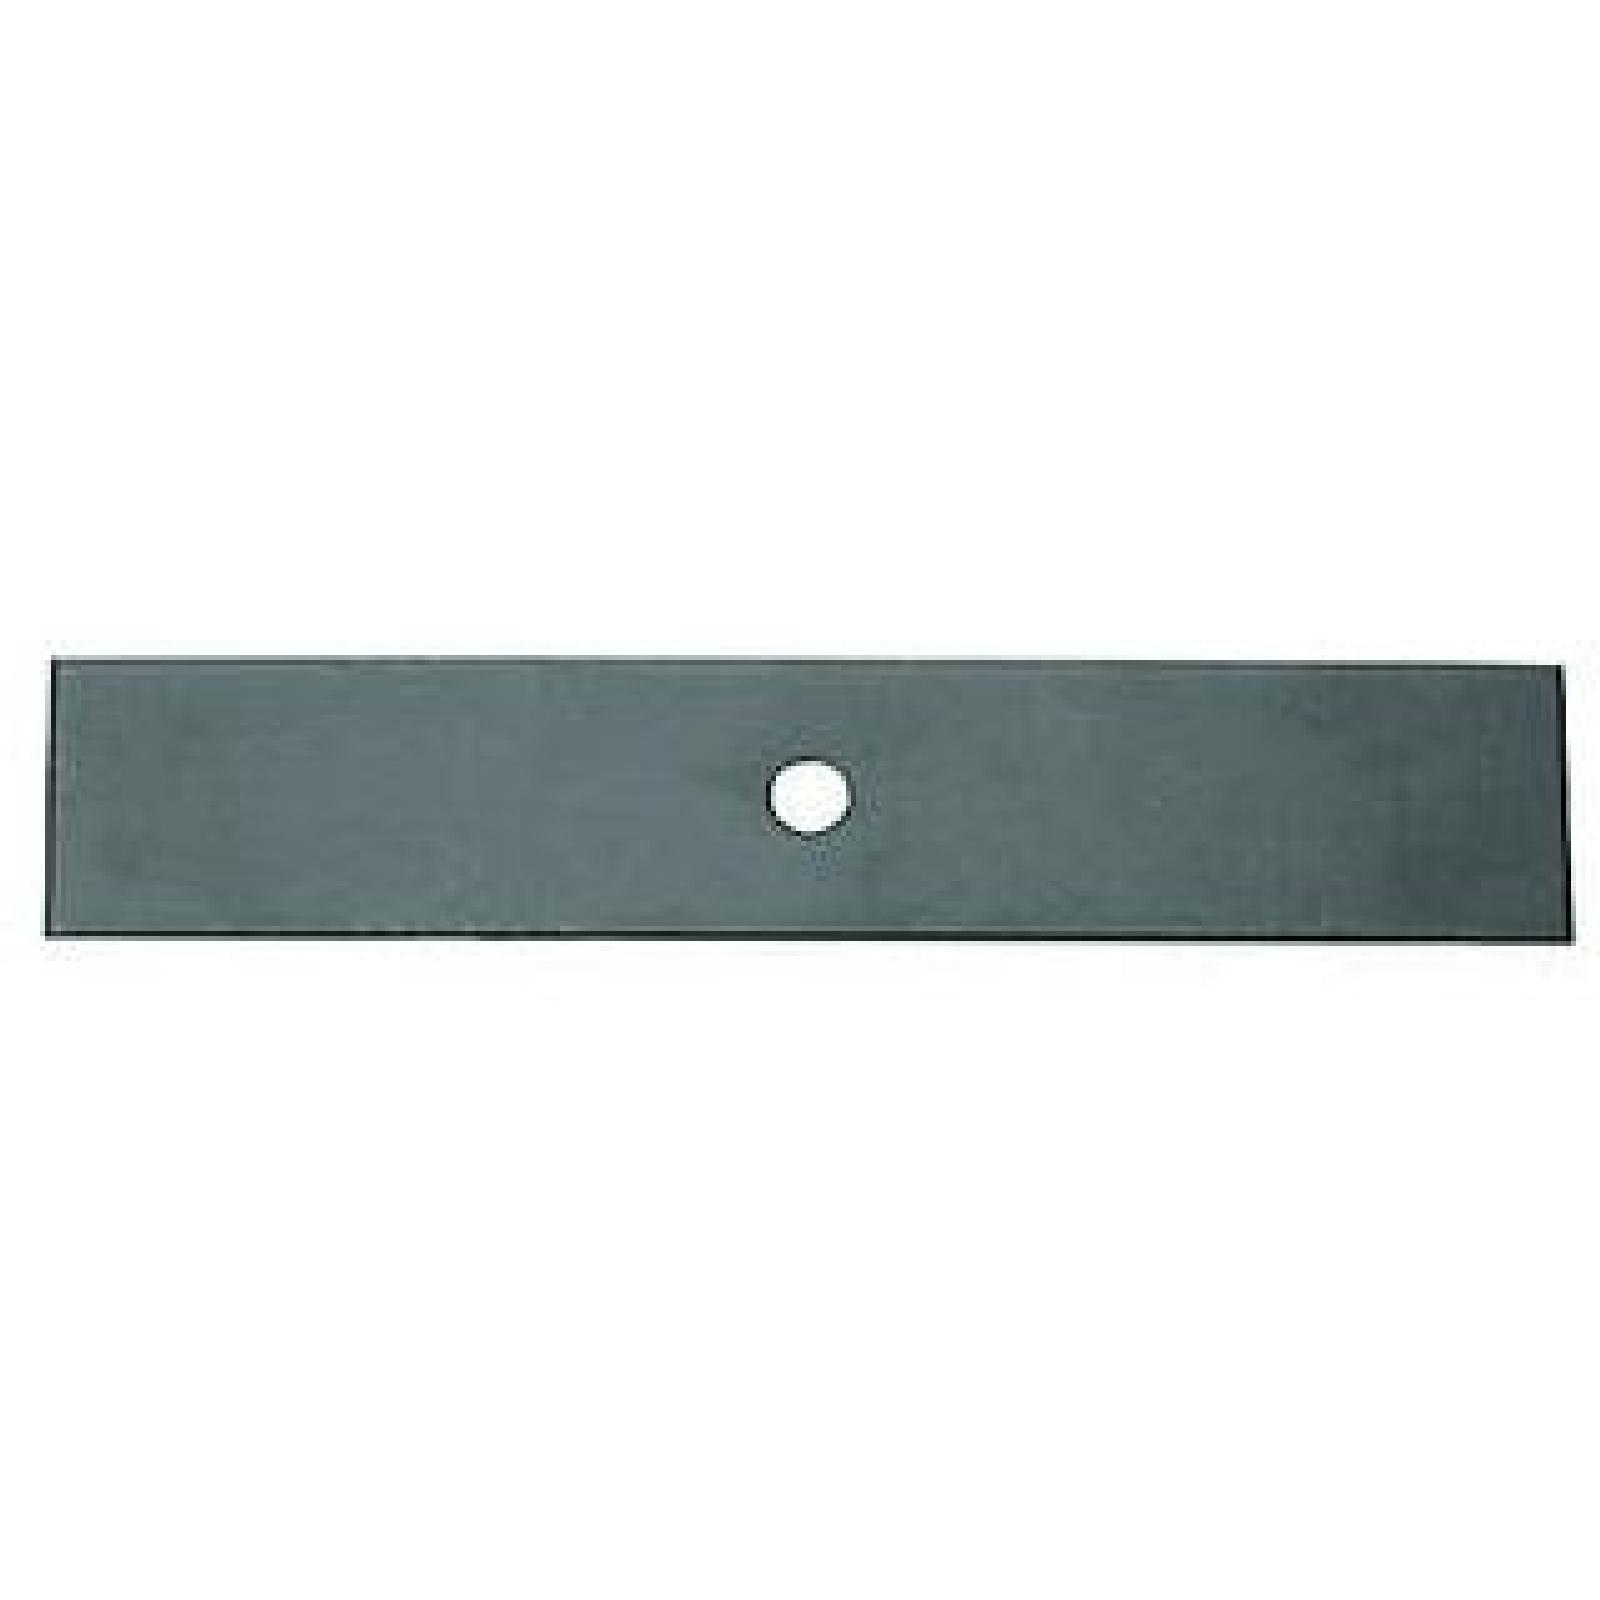 EDGER BLADE, 8 3/4IN, WEE part# 40-010 by Oregon - Click Image to Close